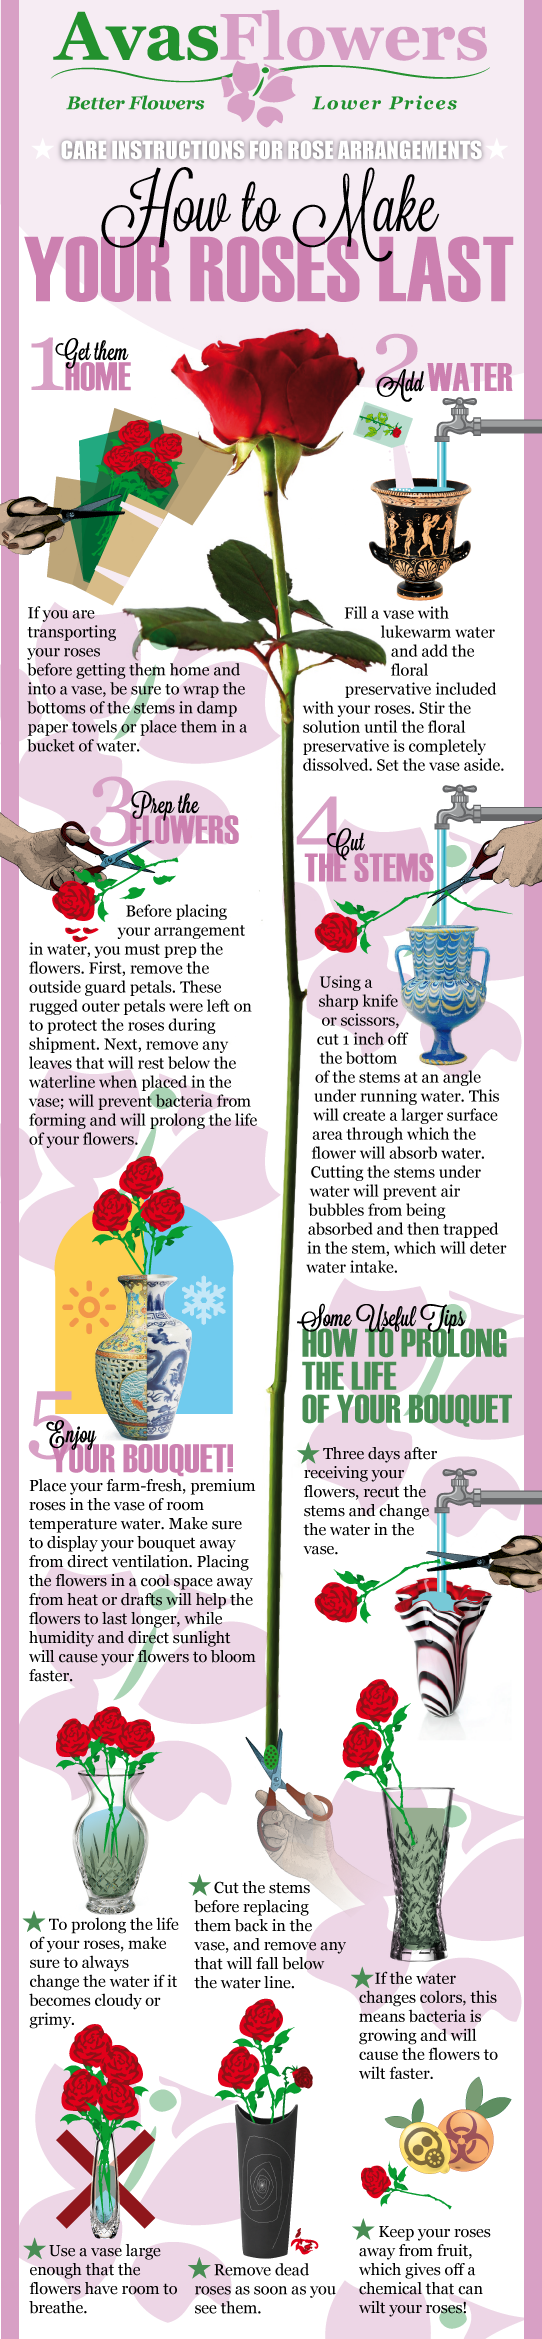 Infographic - How To Make Your Roses Last